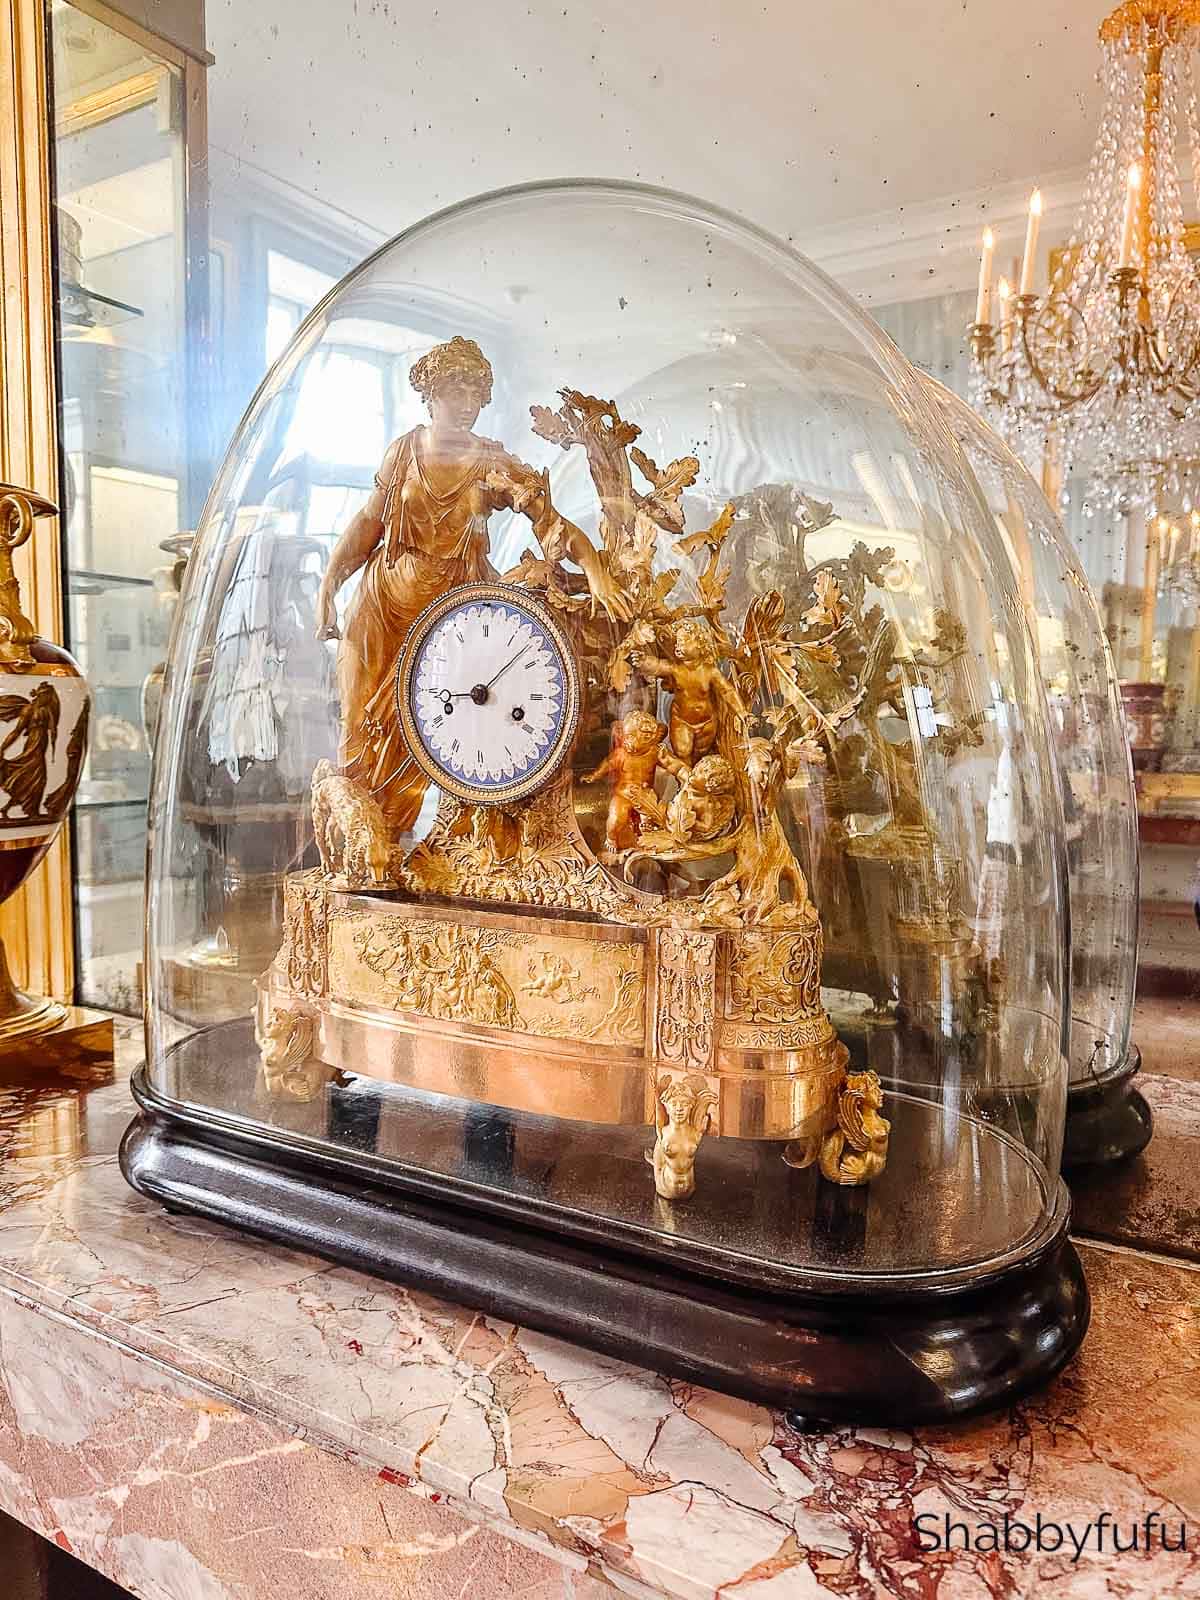 ornate gilded antique French clock at the Palace of Fontainbleau France